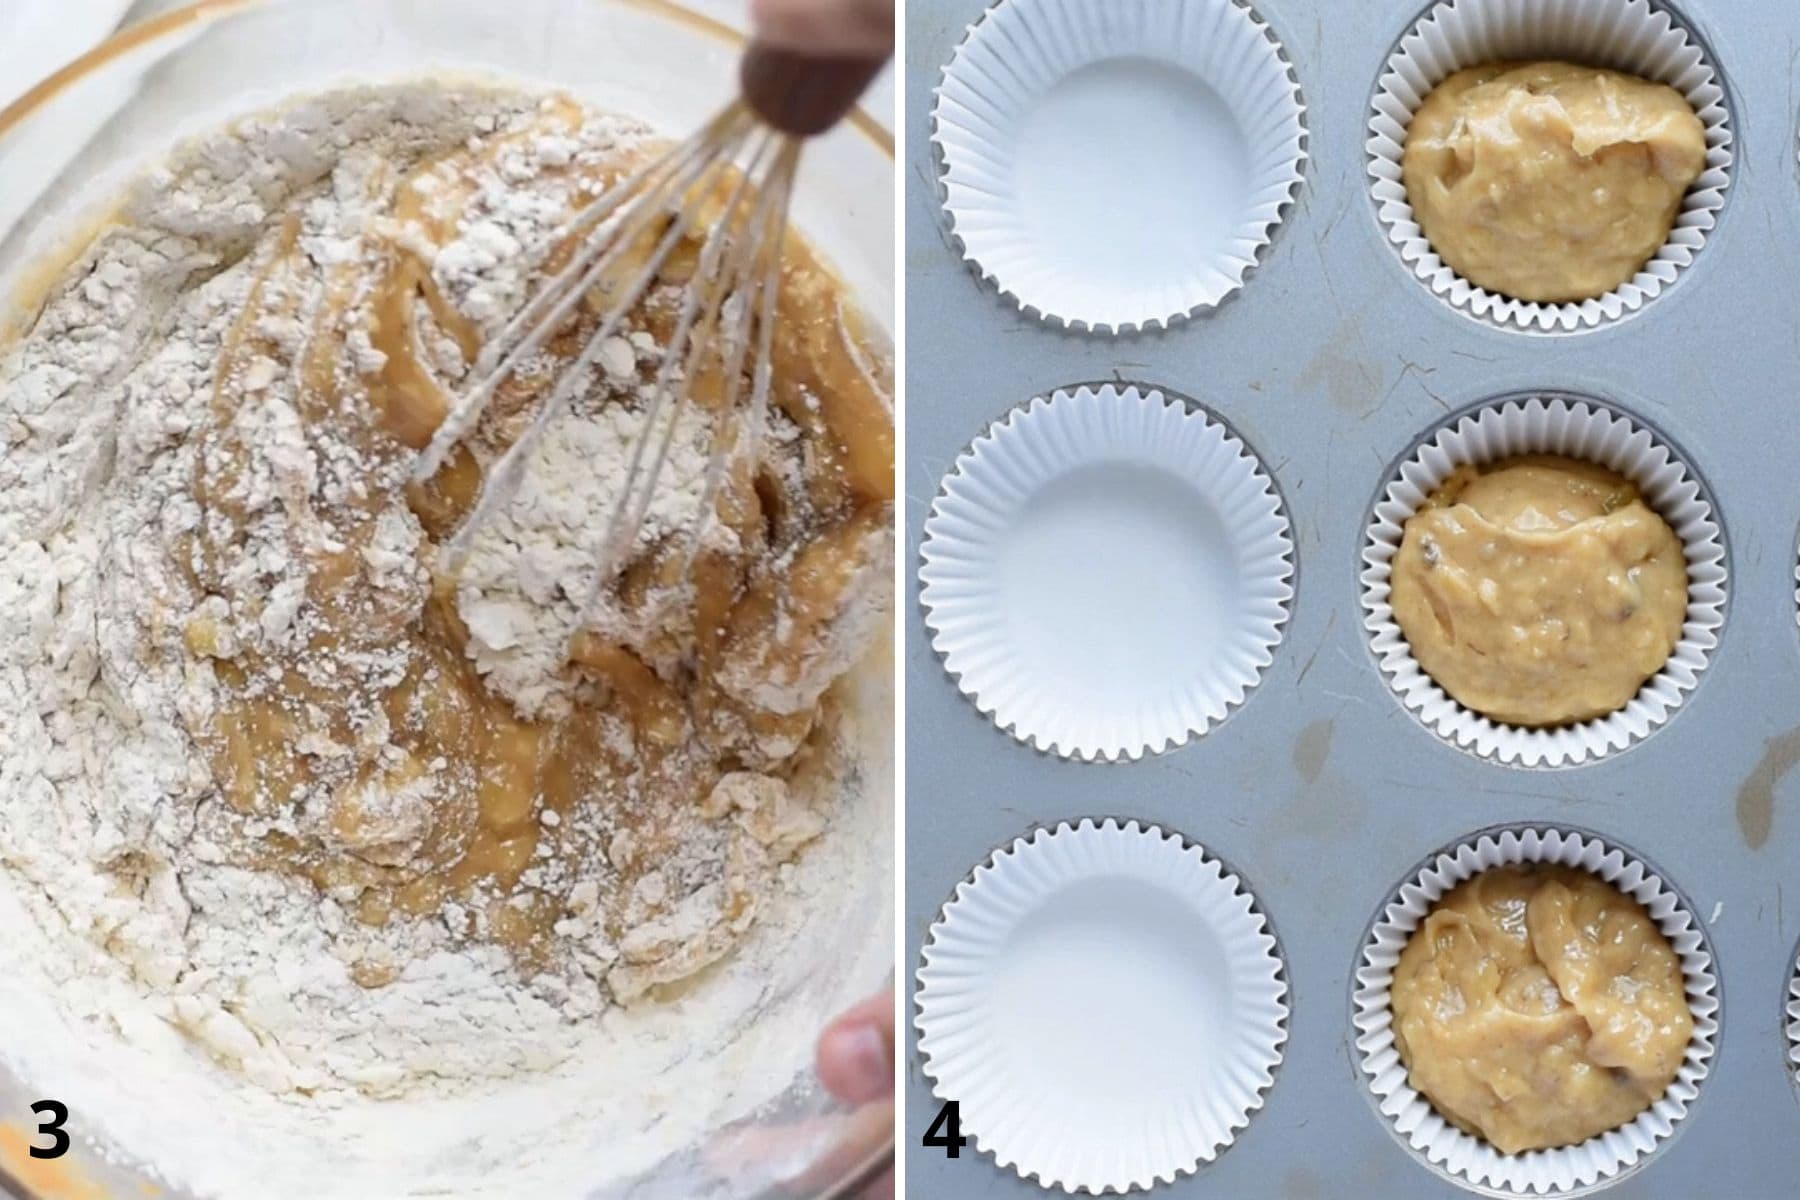 final two steps of making muffins